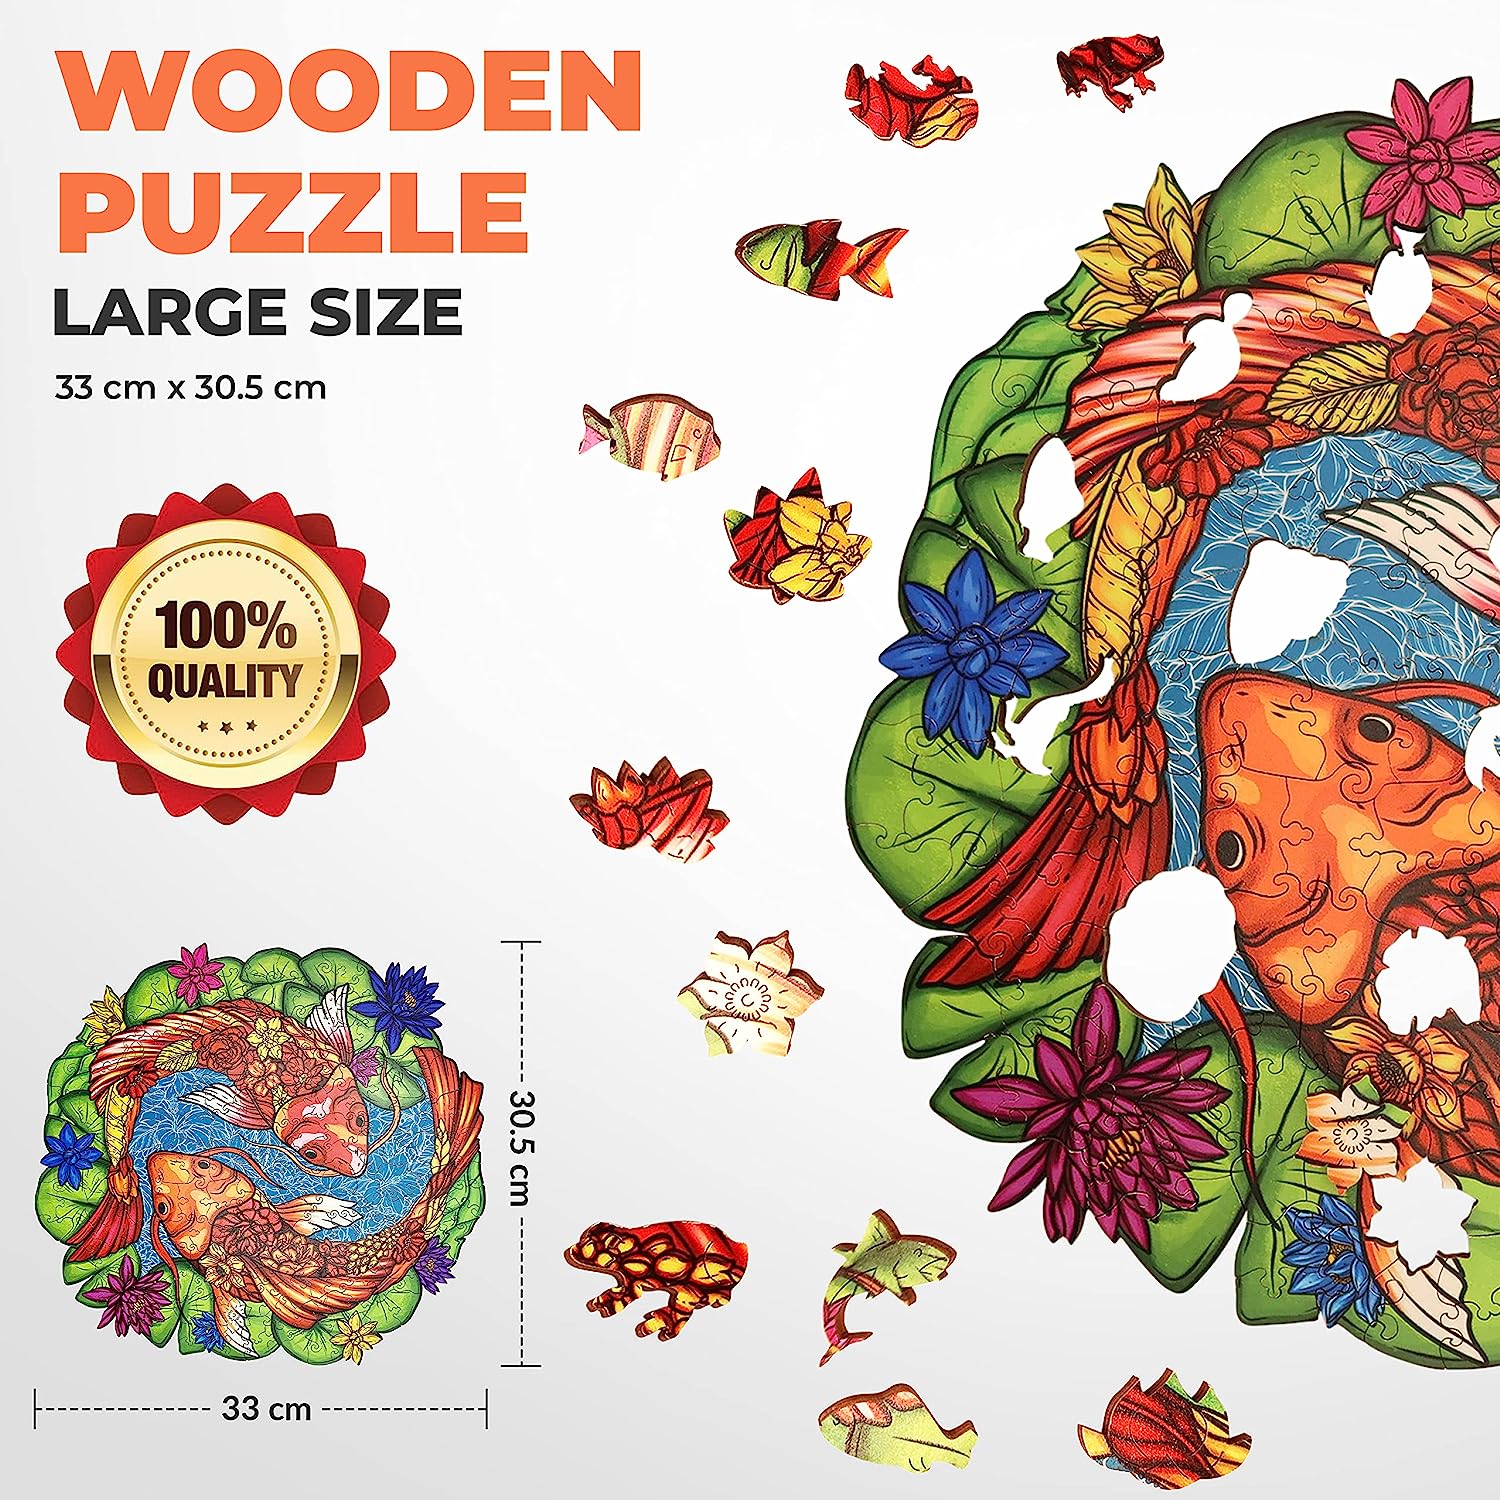 200 Pcs Lucky Koi Animal Shaped Puzzle with Box Stand - 13 x 12 Inches Wooden Jigsaw Puzzle for Adults - Challenging Wooden Animal Puzzle Kit